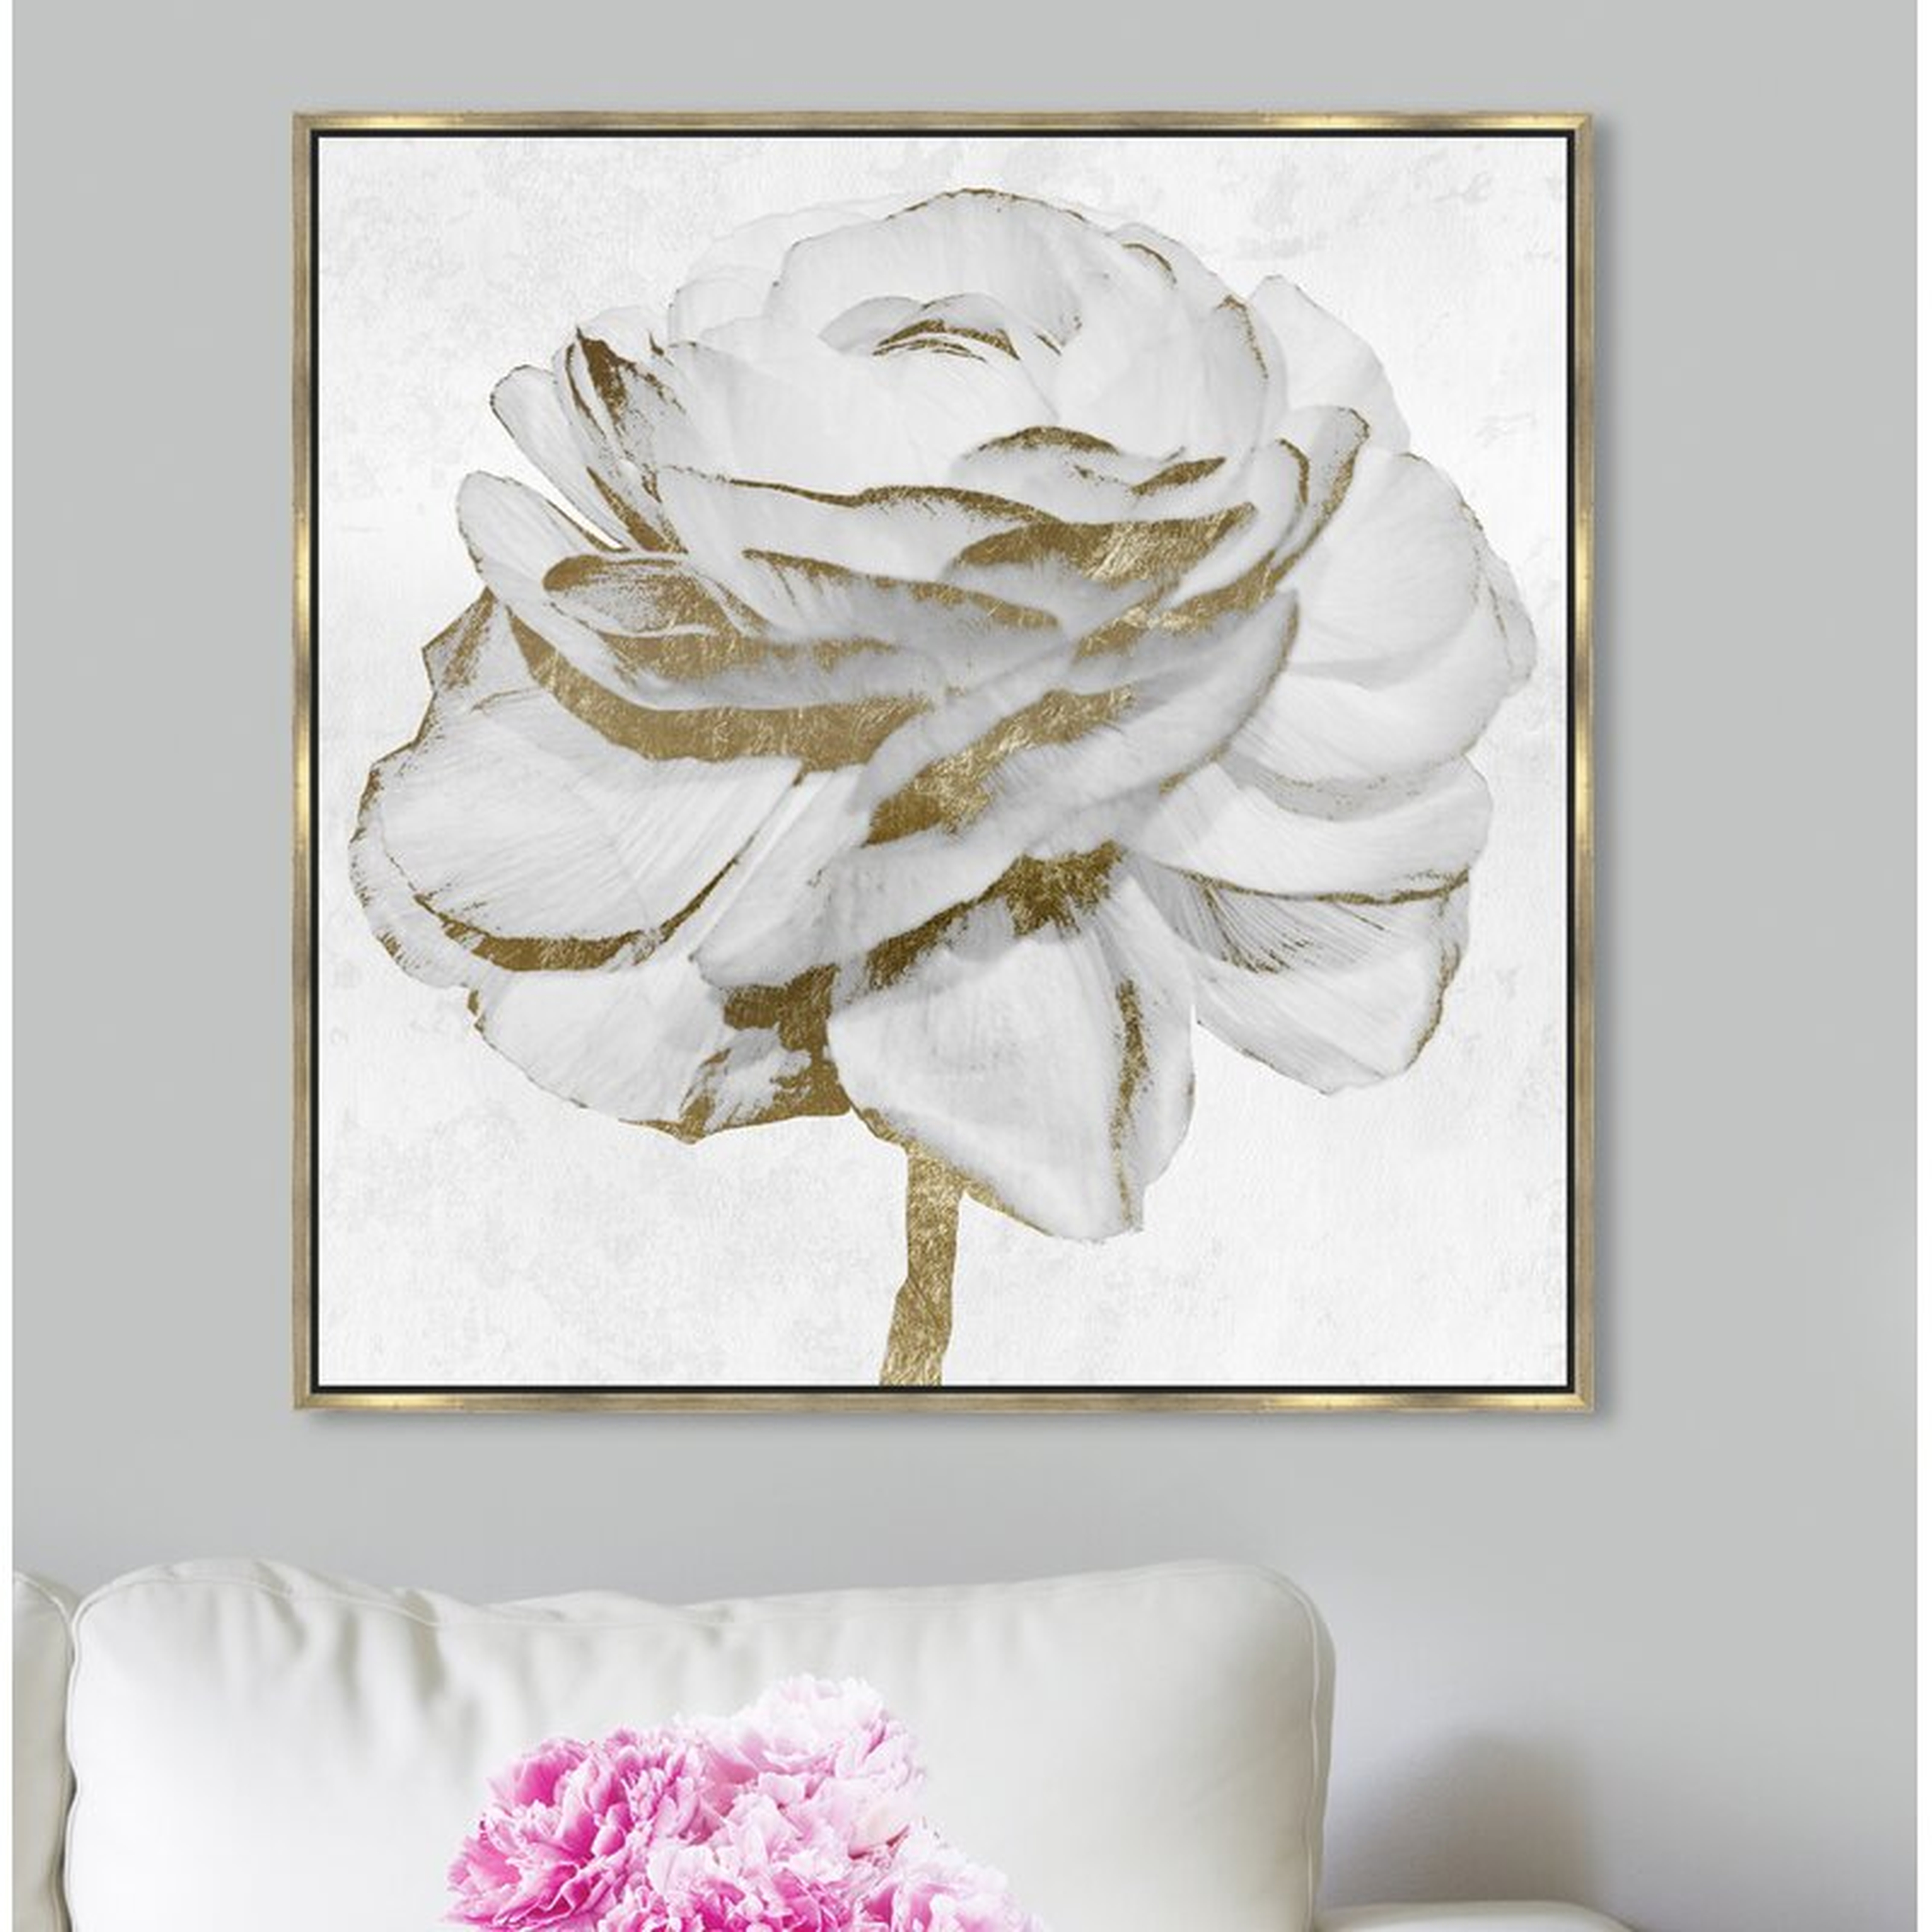 Oliver Gal Signature 'White Gold Peony' Graphic Art Print on Wrapped Canvas Size: 30" H x 30" W x 1.5" D - Perigold